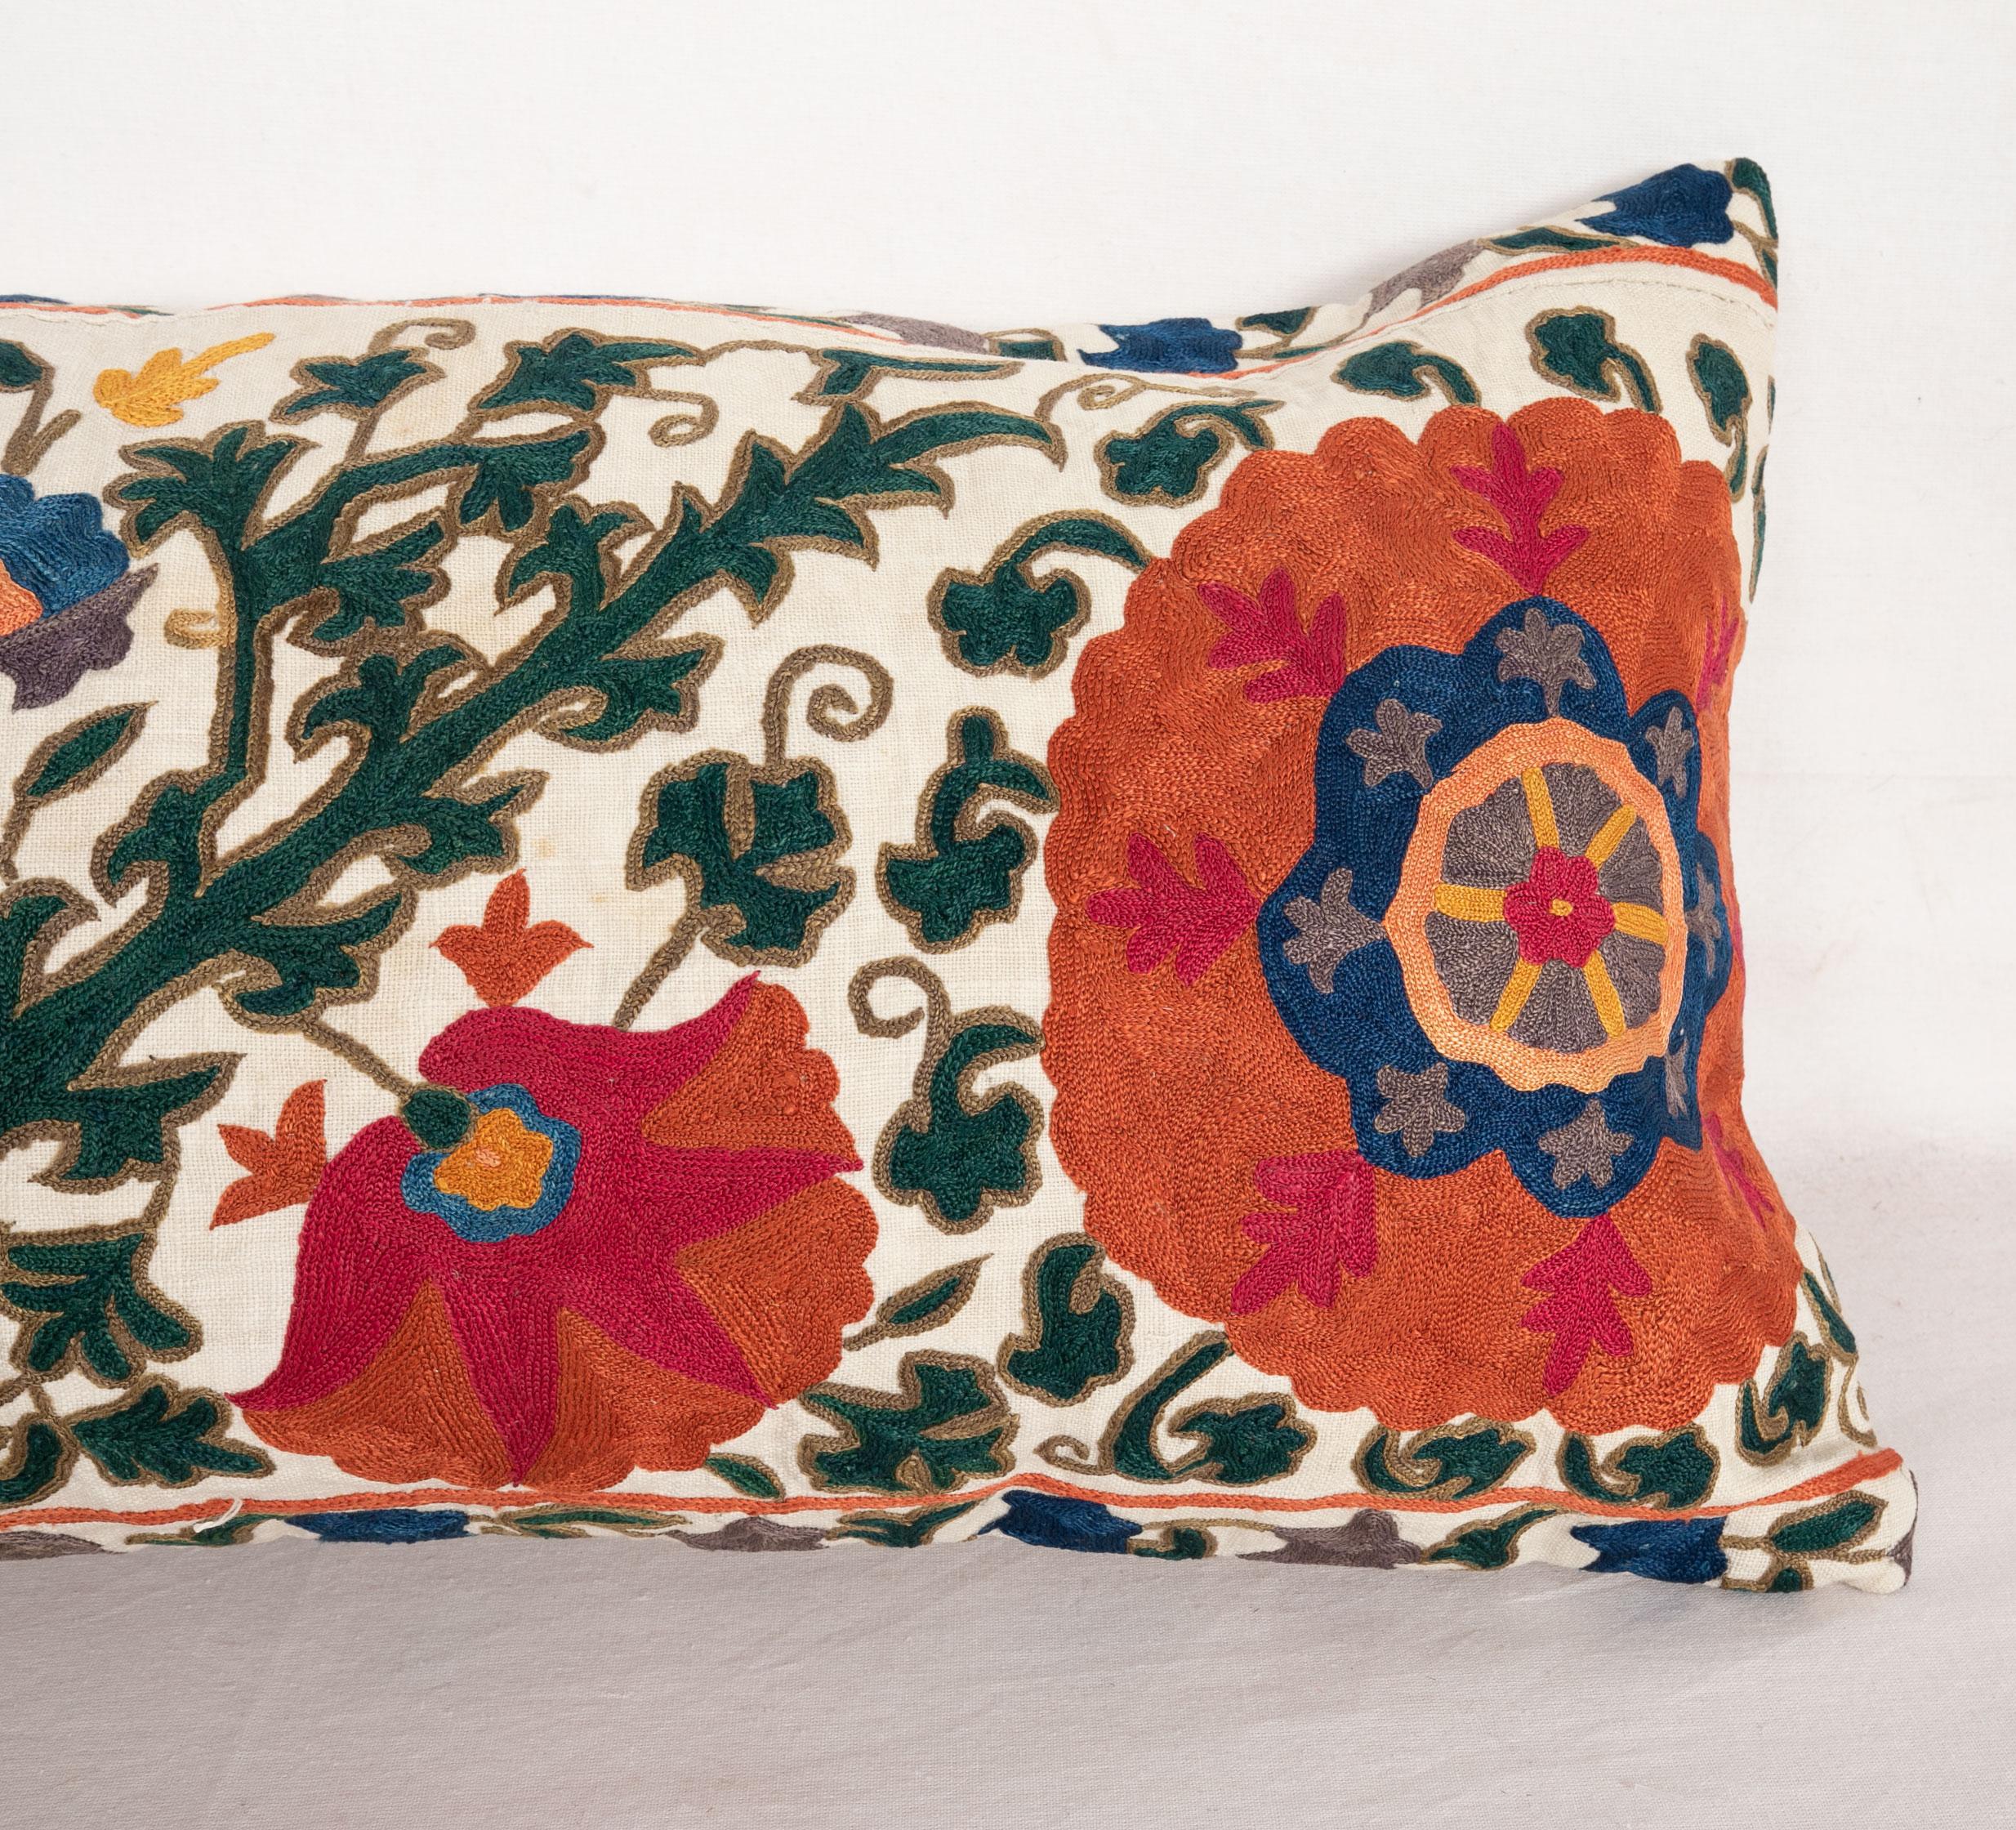 Silk Antique Suzani Pillow Case Fashioned from a 19th Century Suzani from Uzbekistan